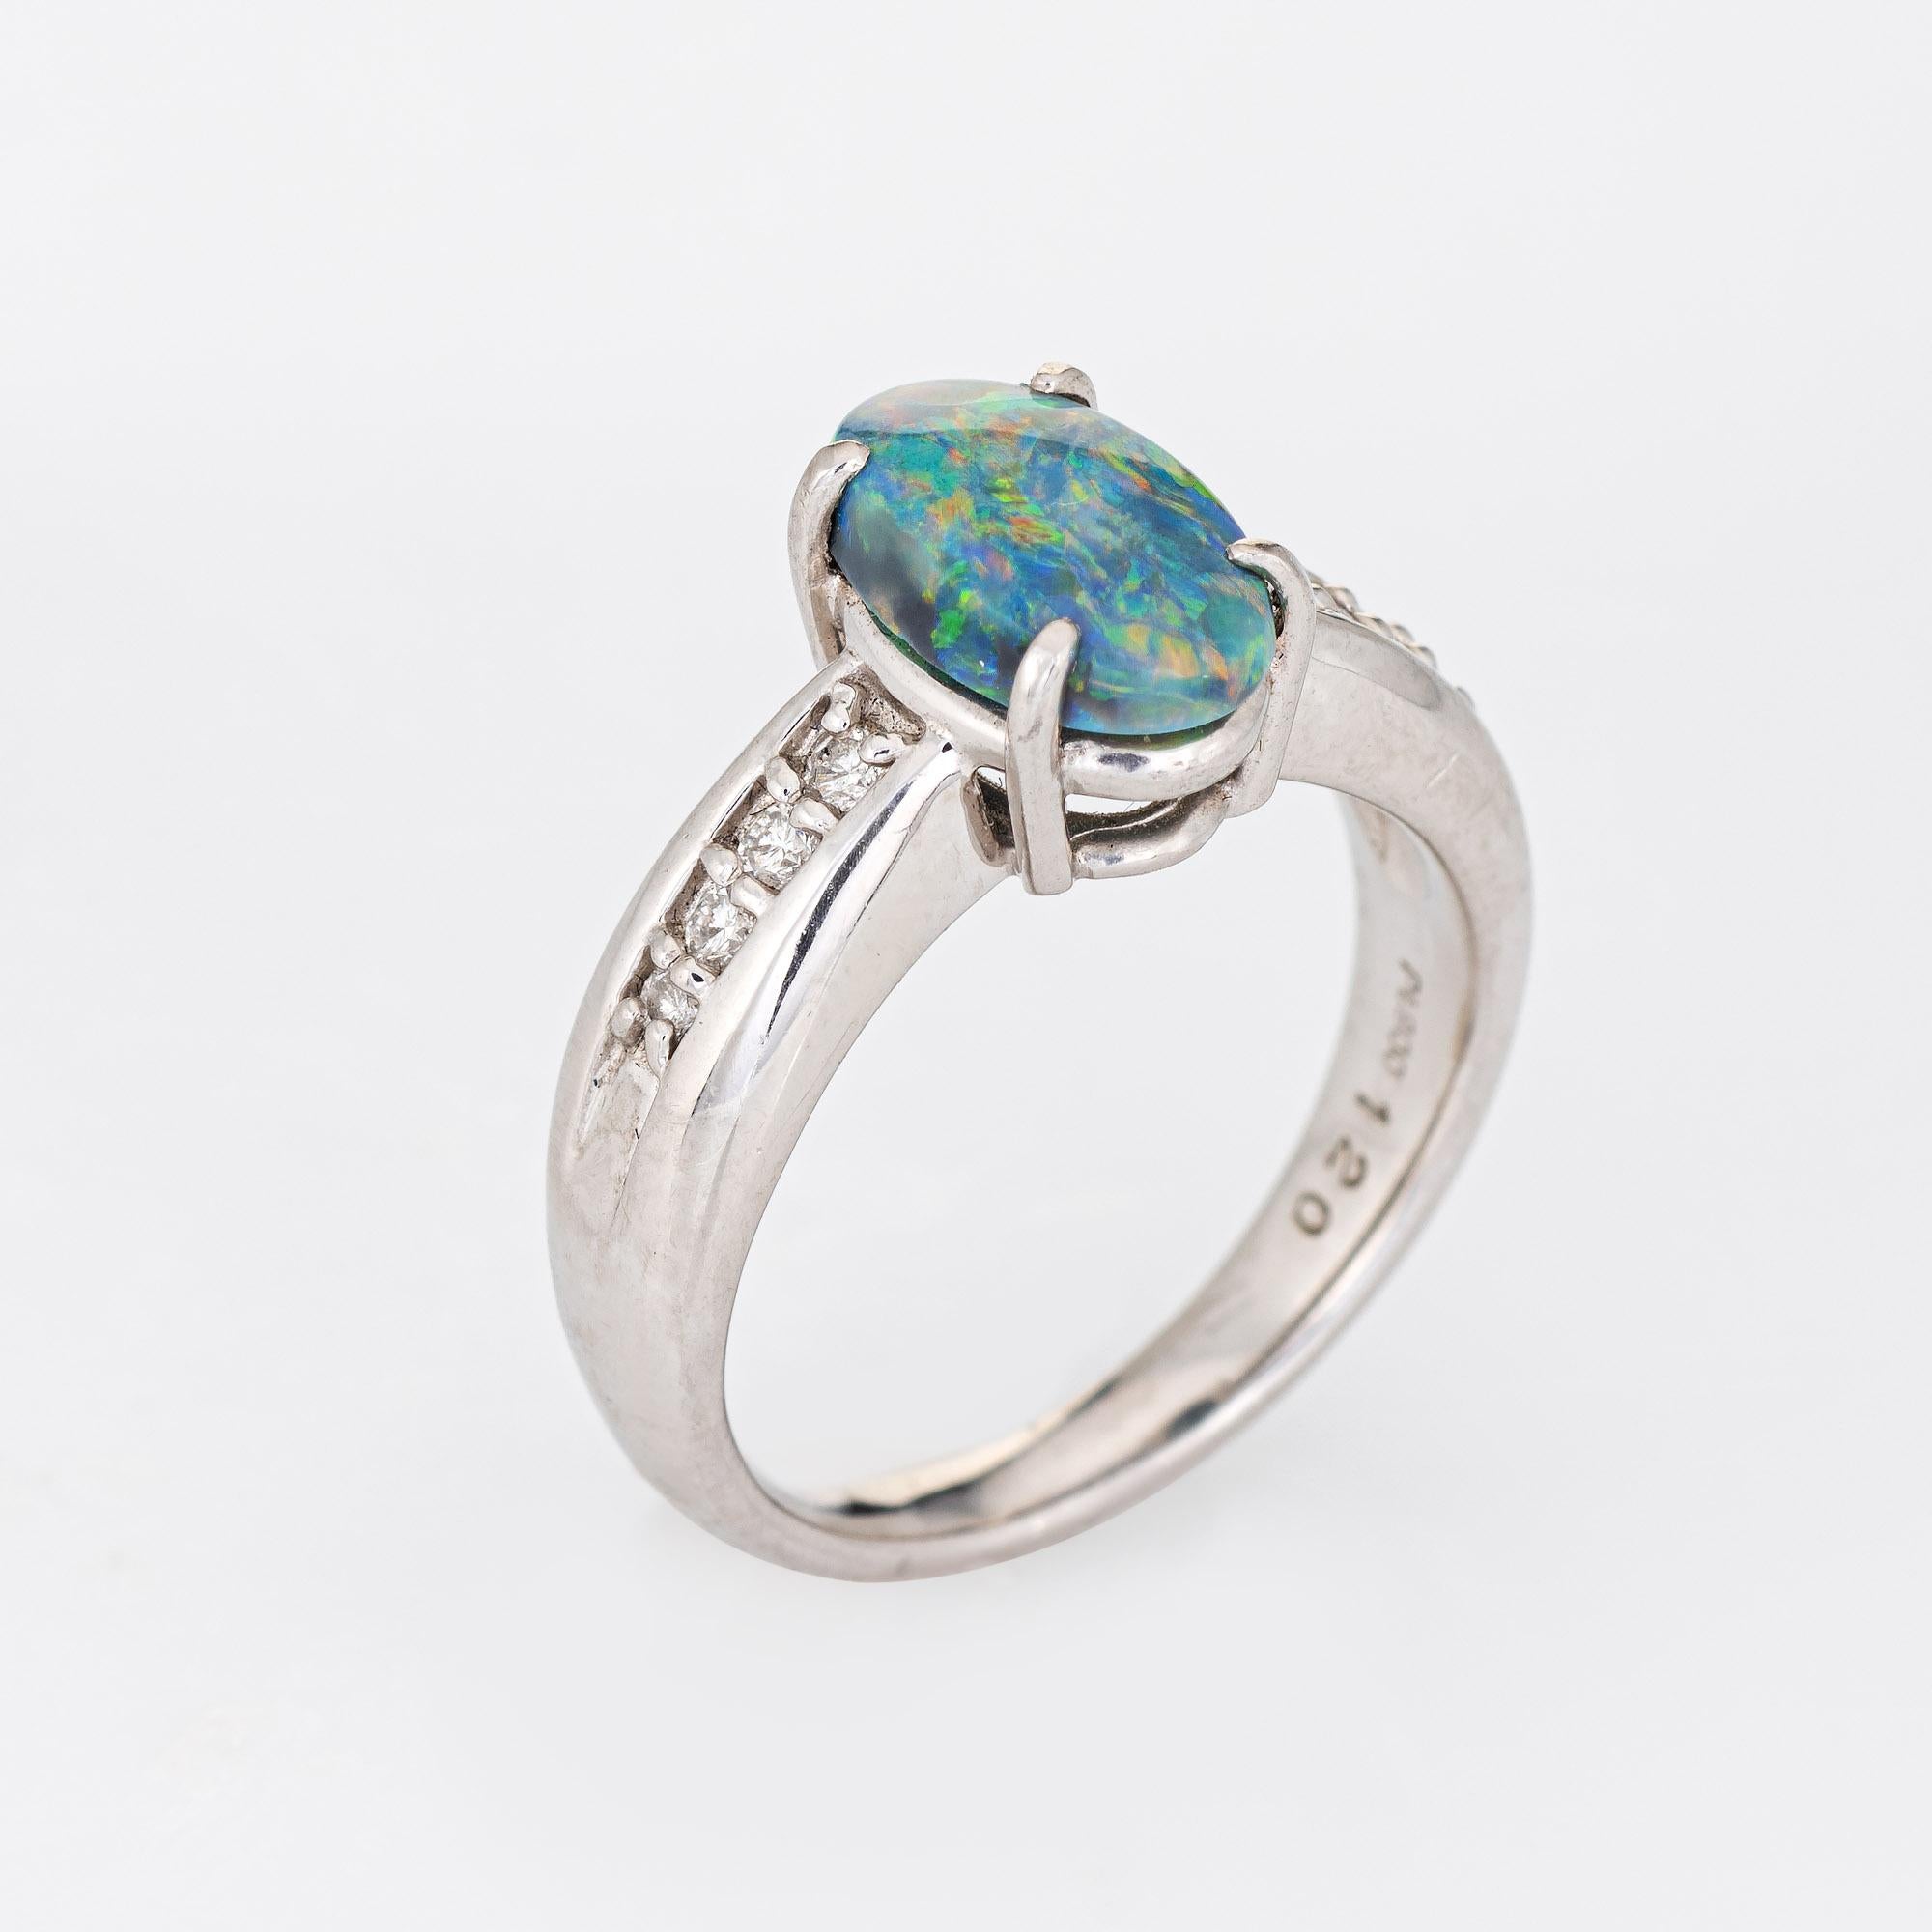 Stylish natural semi-black opal & diamond ring (circa 2000s) crafted in platinum. 

Natural opal measures 10mm x 7mm (estimated at 1.20 carats) is accented with 0.17 carats of diamonds (estimated at H-I color and VS2-SI1 clarity). The opal is in